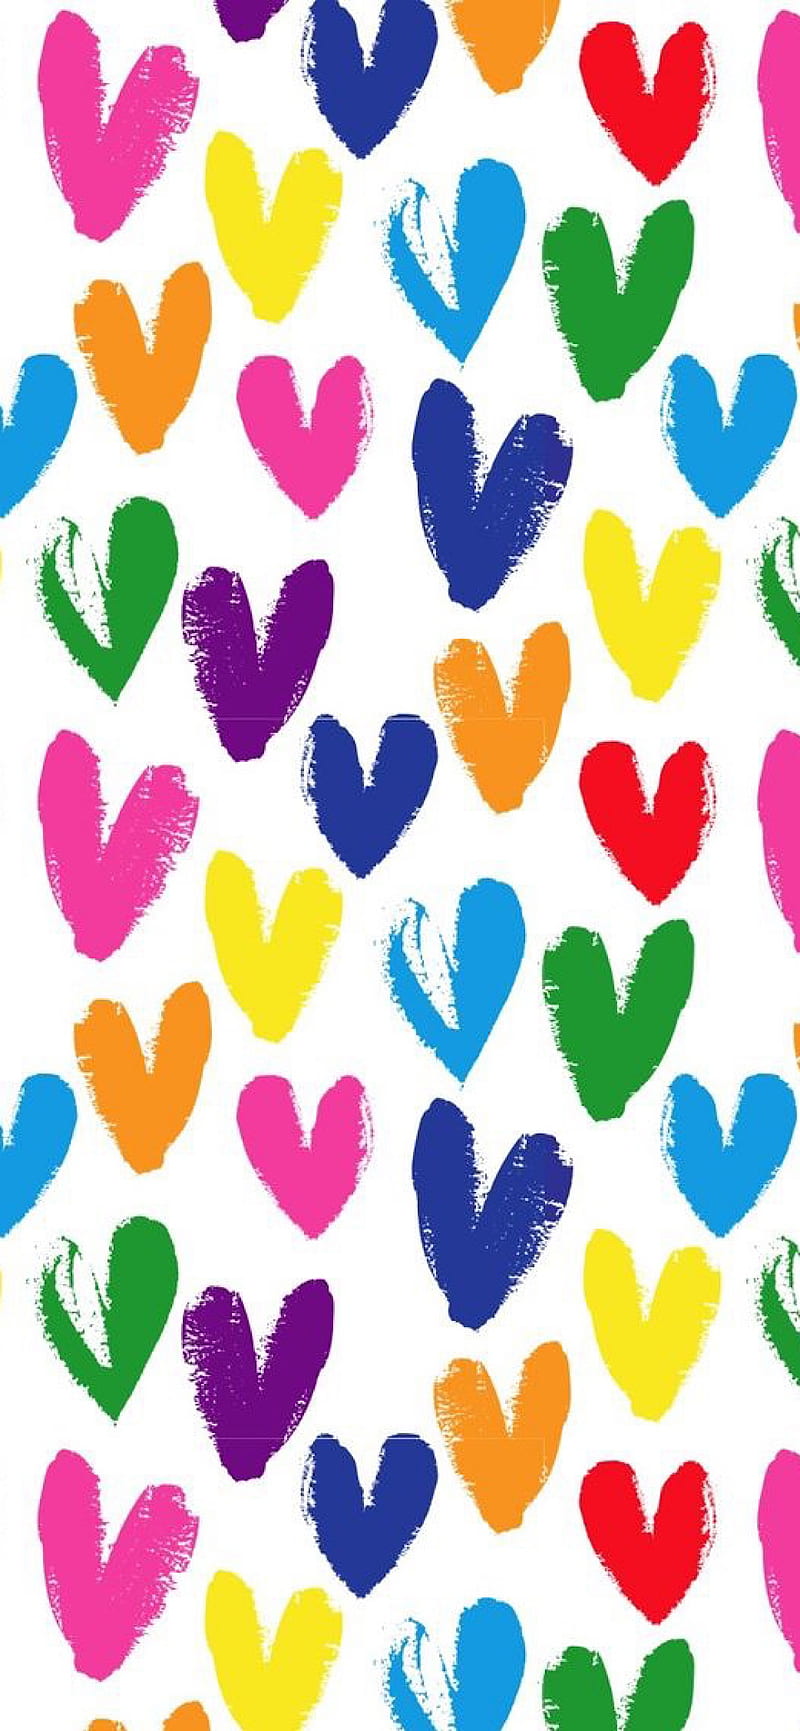 Colored Heart Background Images Browse 2162737 Stock Photos  Vectors  Free Download with Trial  Shutterstock